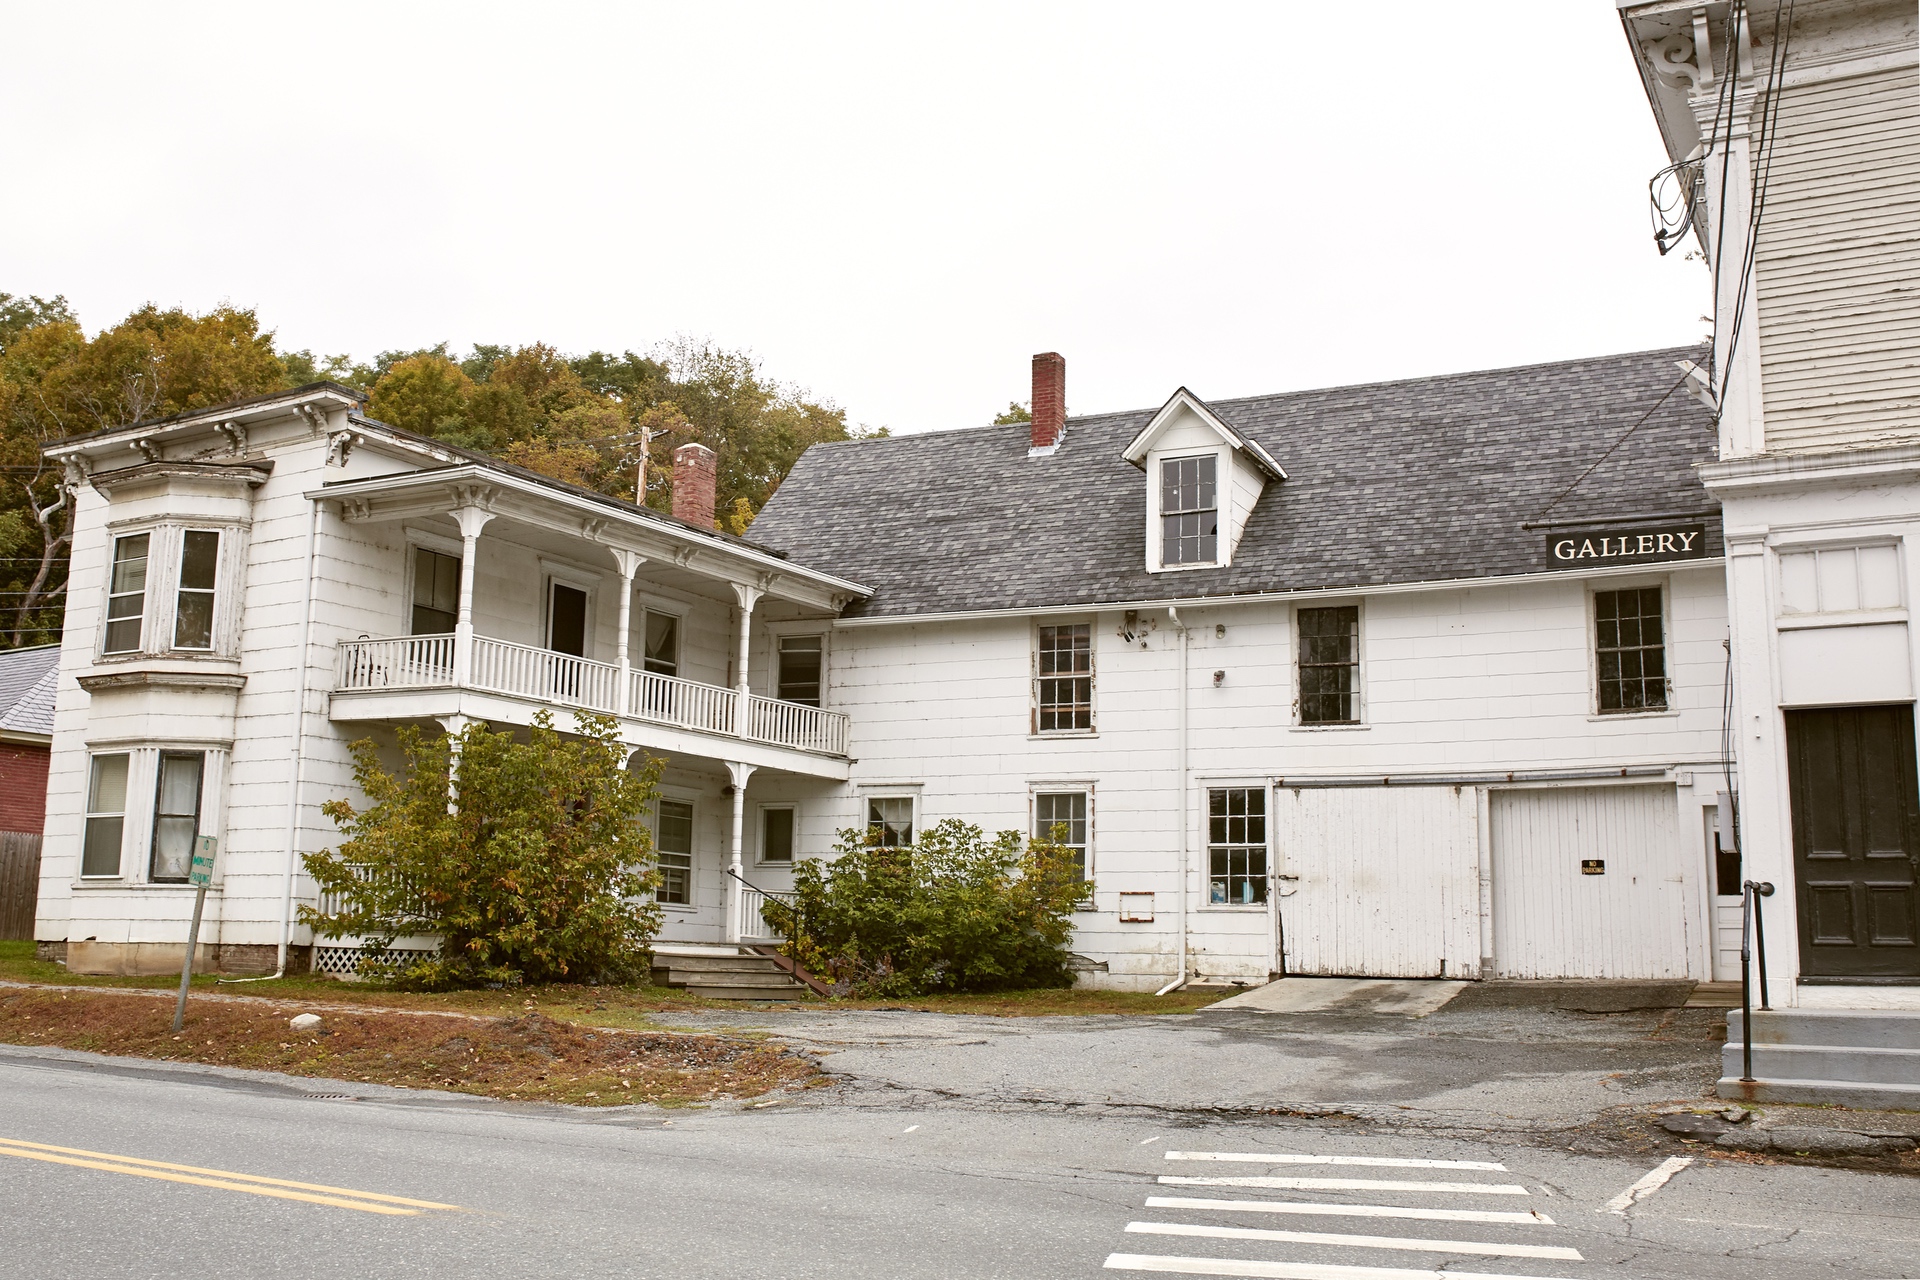 White 2-story older home apartment with second-story porch on cool fall day in Quechee, VT